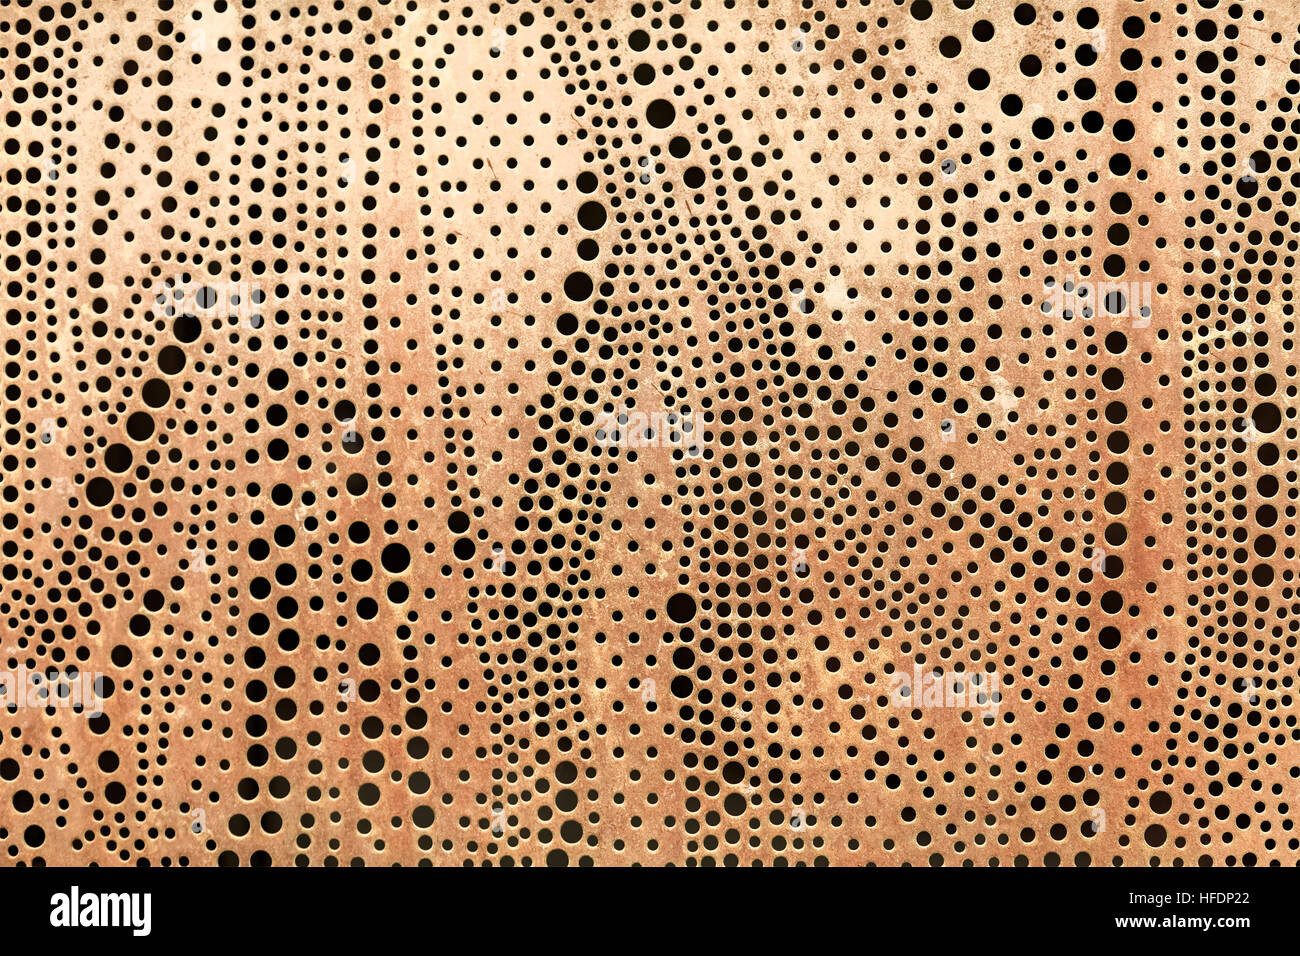 Perforated Metal Abstract High Resolution Stock Photography And Images Alamy